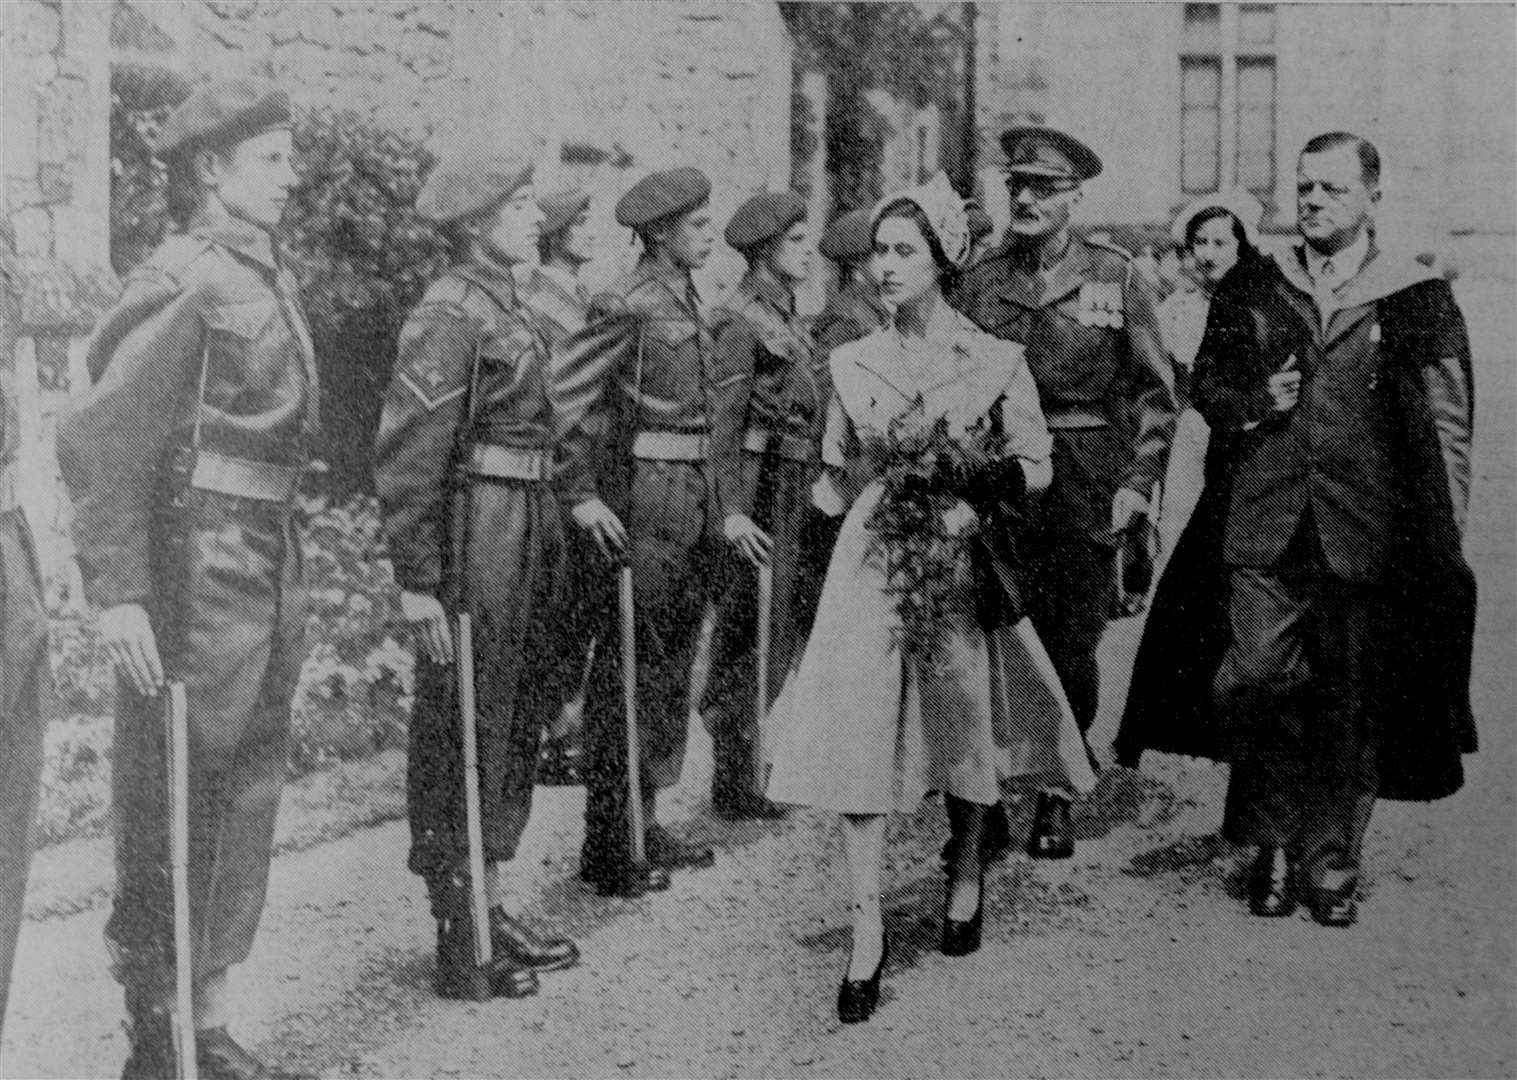 Princess Margaret came to Canterbury in May 1950 to distribute the prizes at St Edmund's school (of which her father, King George VI, was patron). She also went to the Cathedral during her semi-official visit to the city